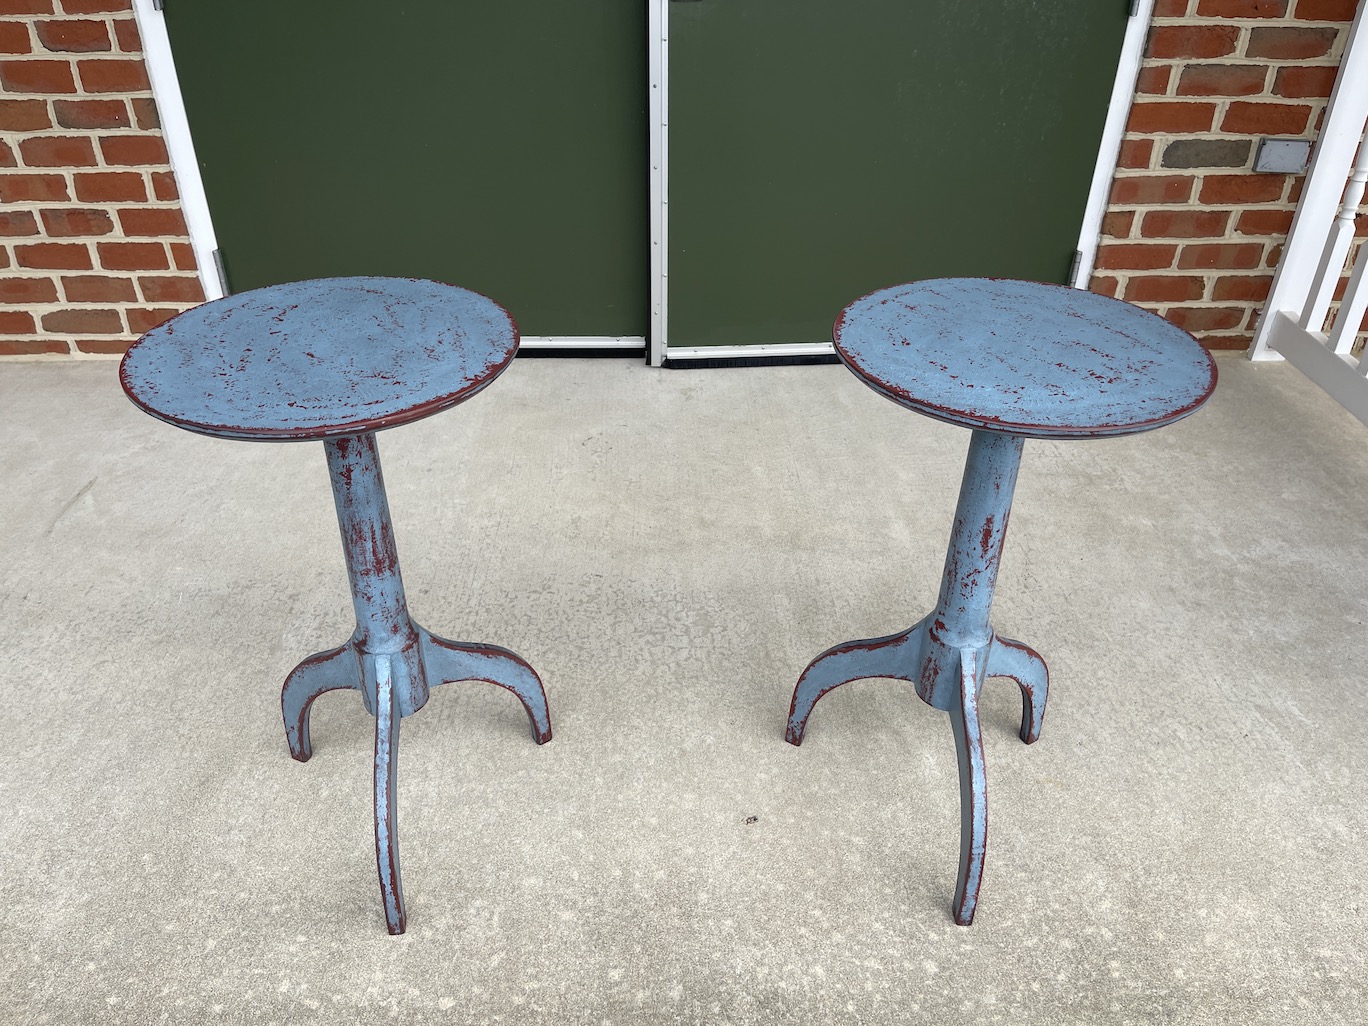 Pair of Shaker Candle Stands - Rustic Country Blue over Rustic Red Image